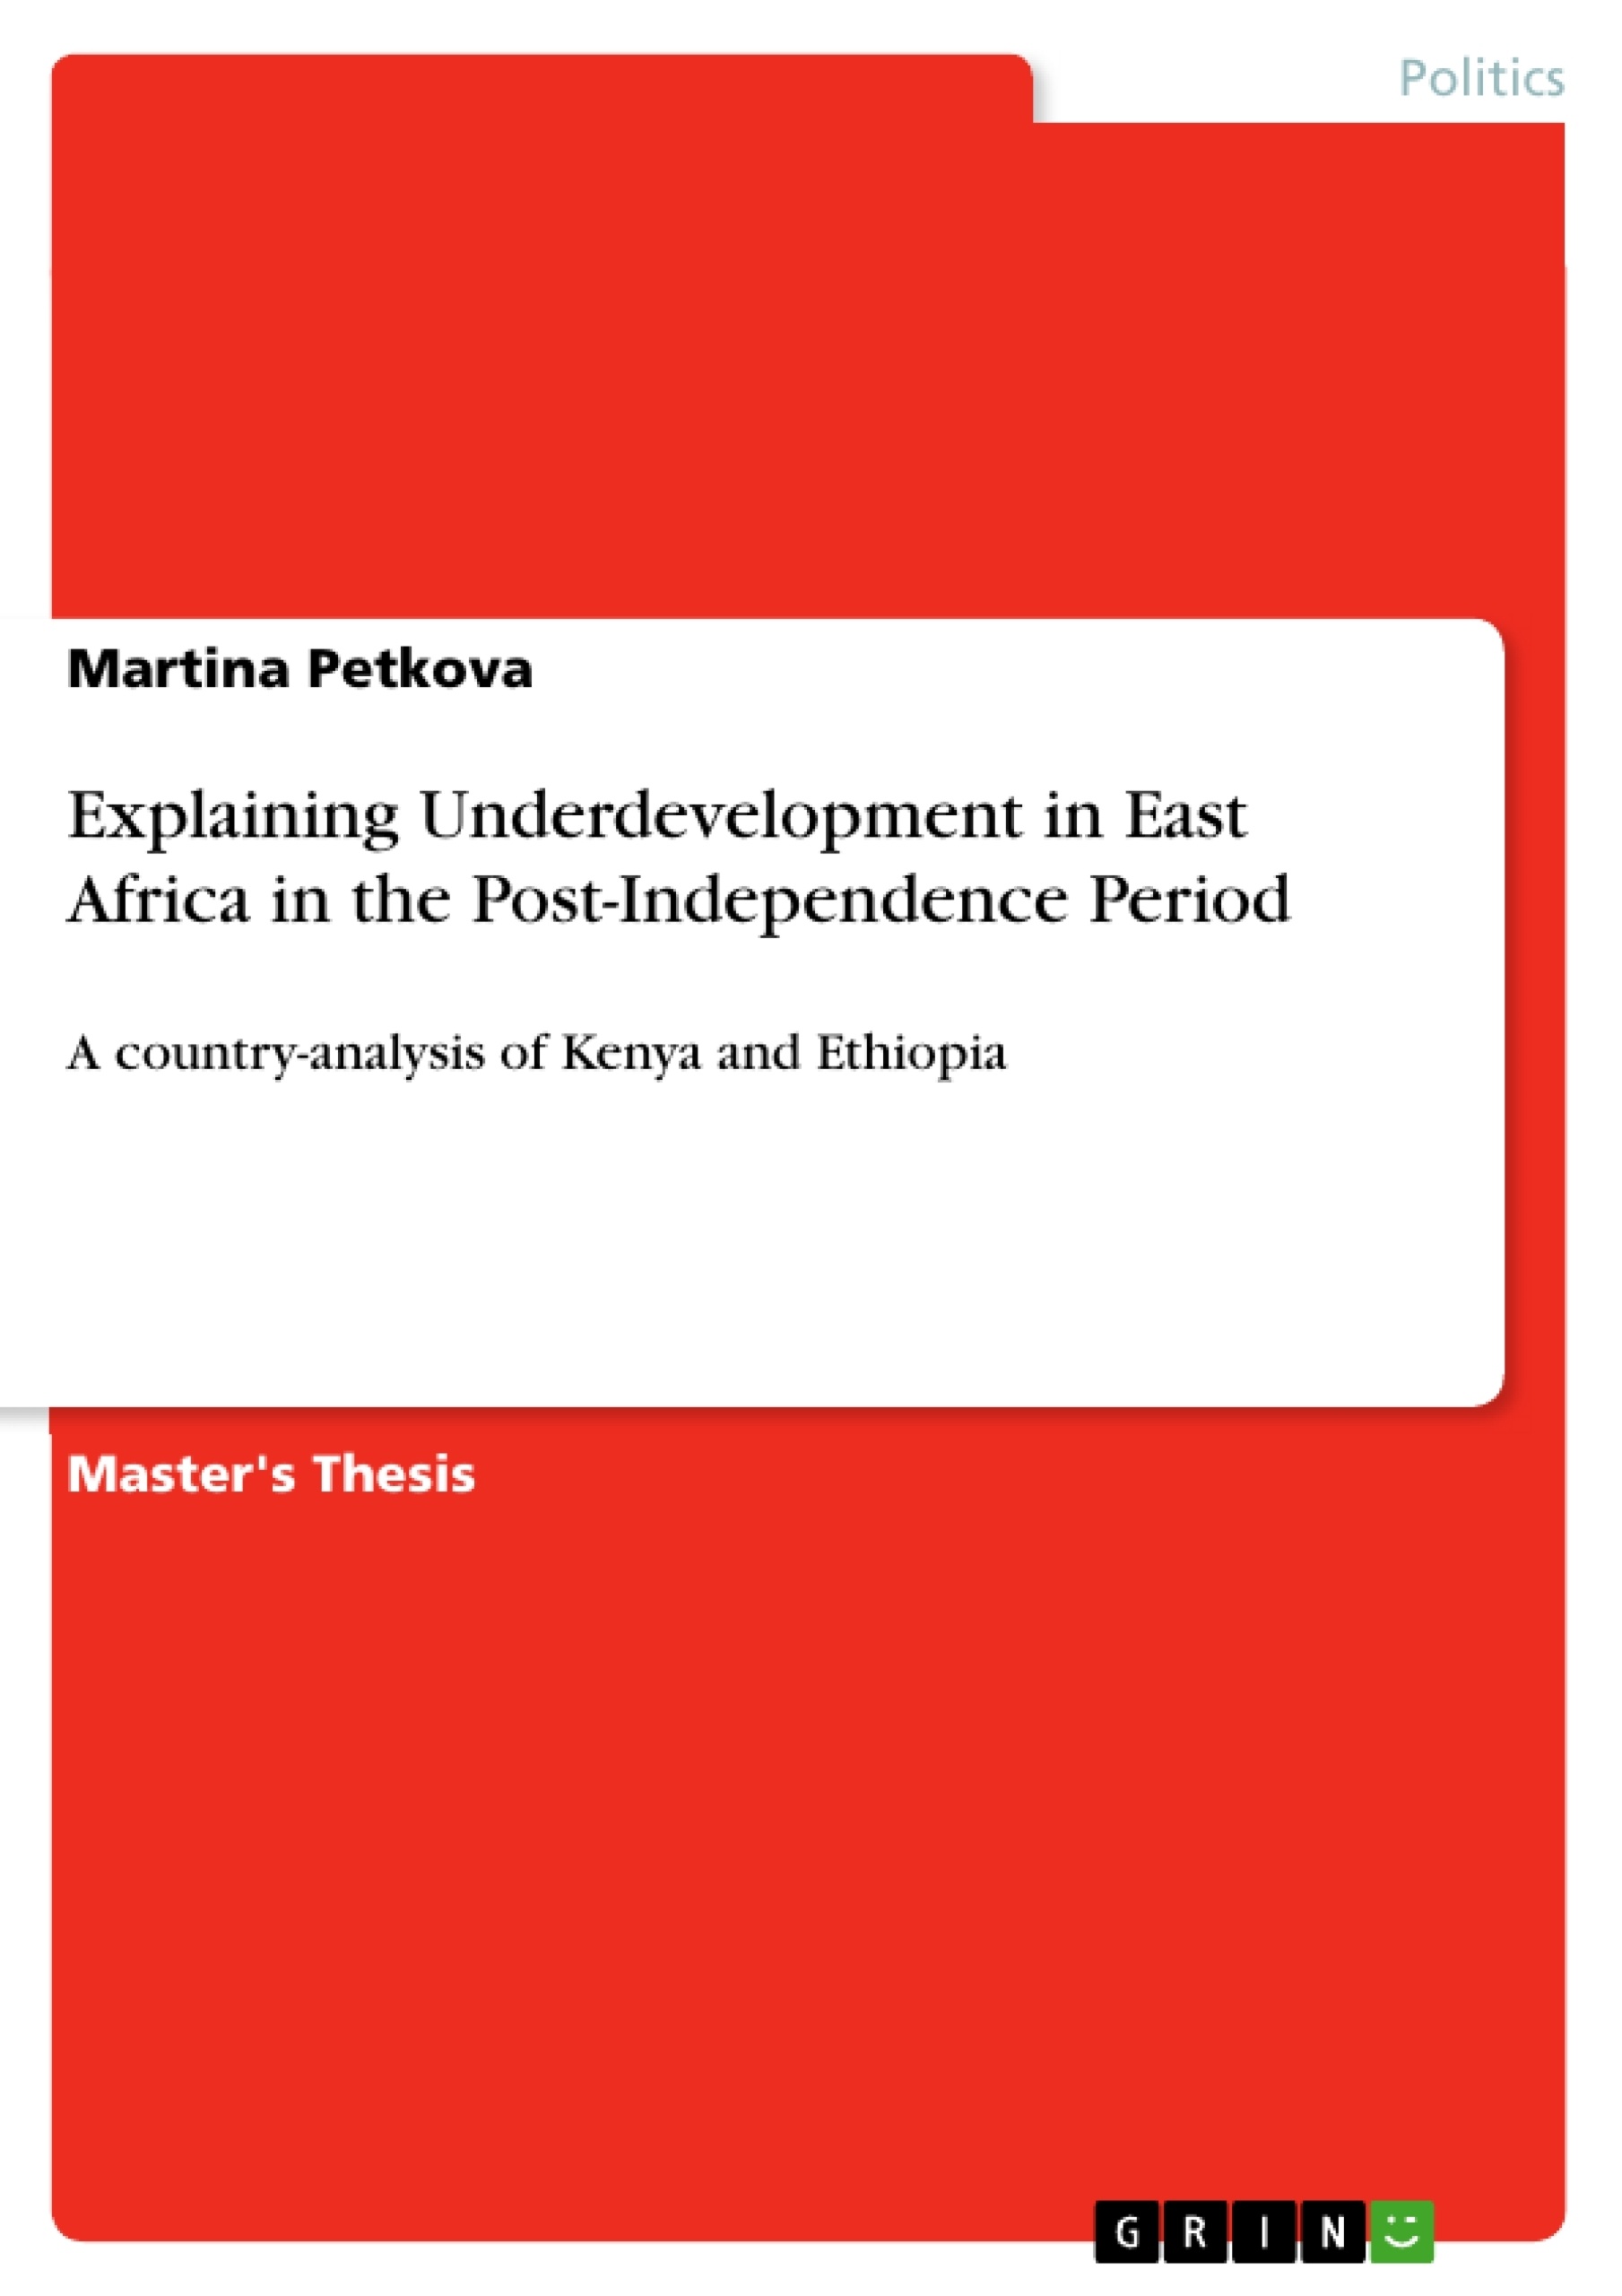 Title: Explaining Underdevelopment in East Africa in the Post-Independence Period